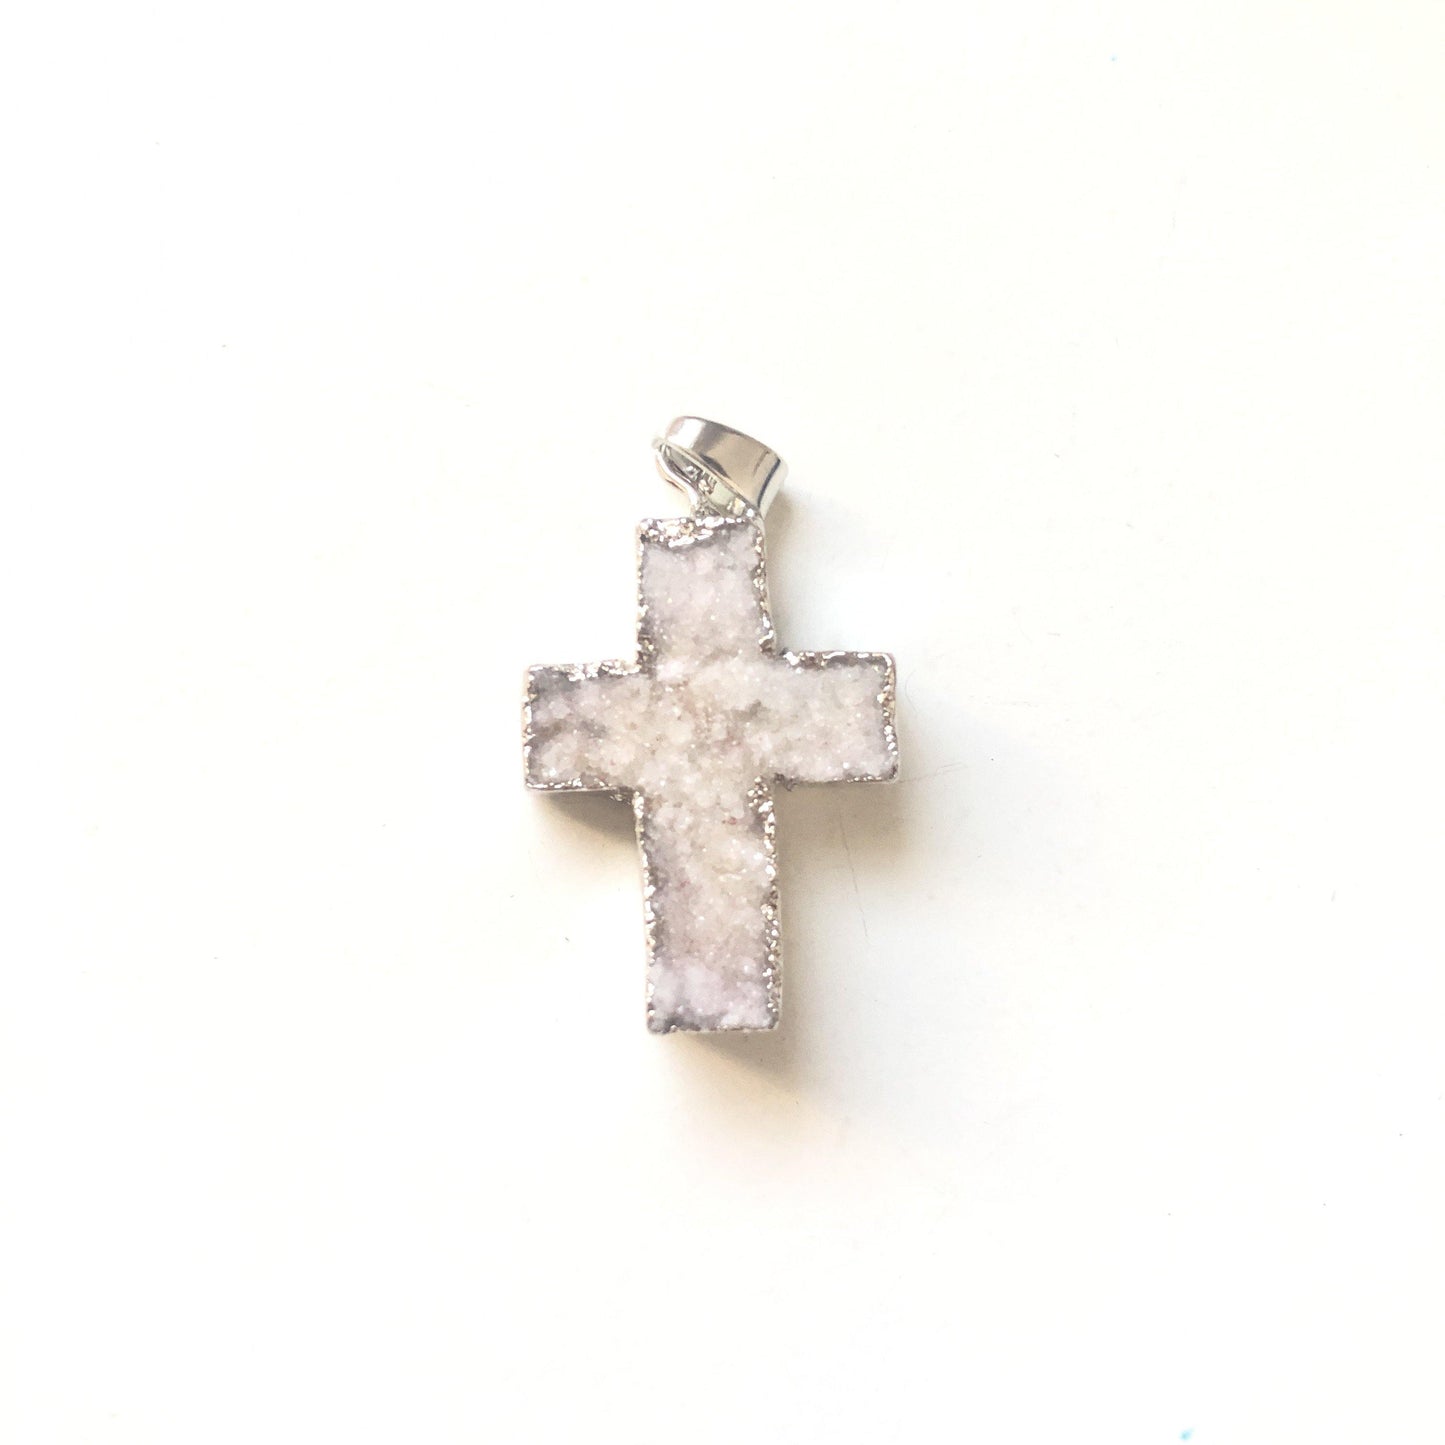 5pcs/lot 30x22mm Cross Natural Agate Druzy Charm-Silver White on Silver Stone Charms Charms Beads Beyond